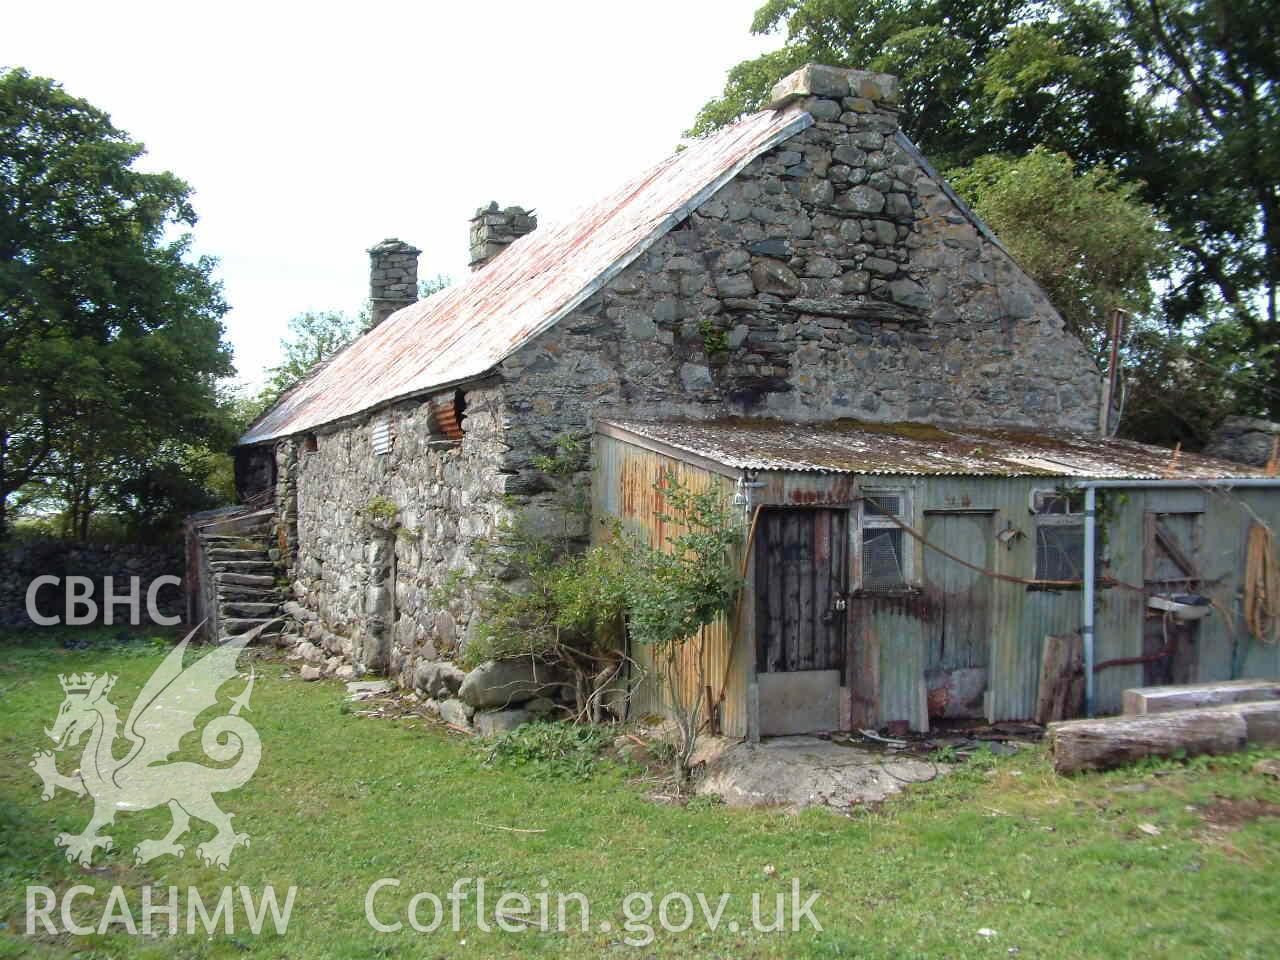 Photograph showing Egryn Dower House, taken by John Latham, 2005.